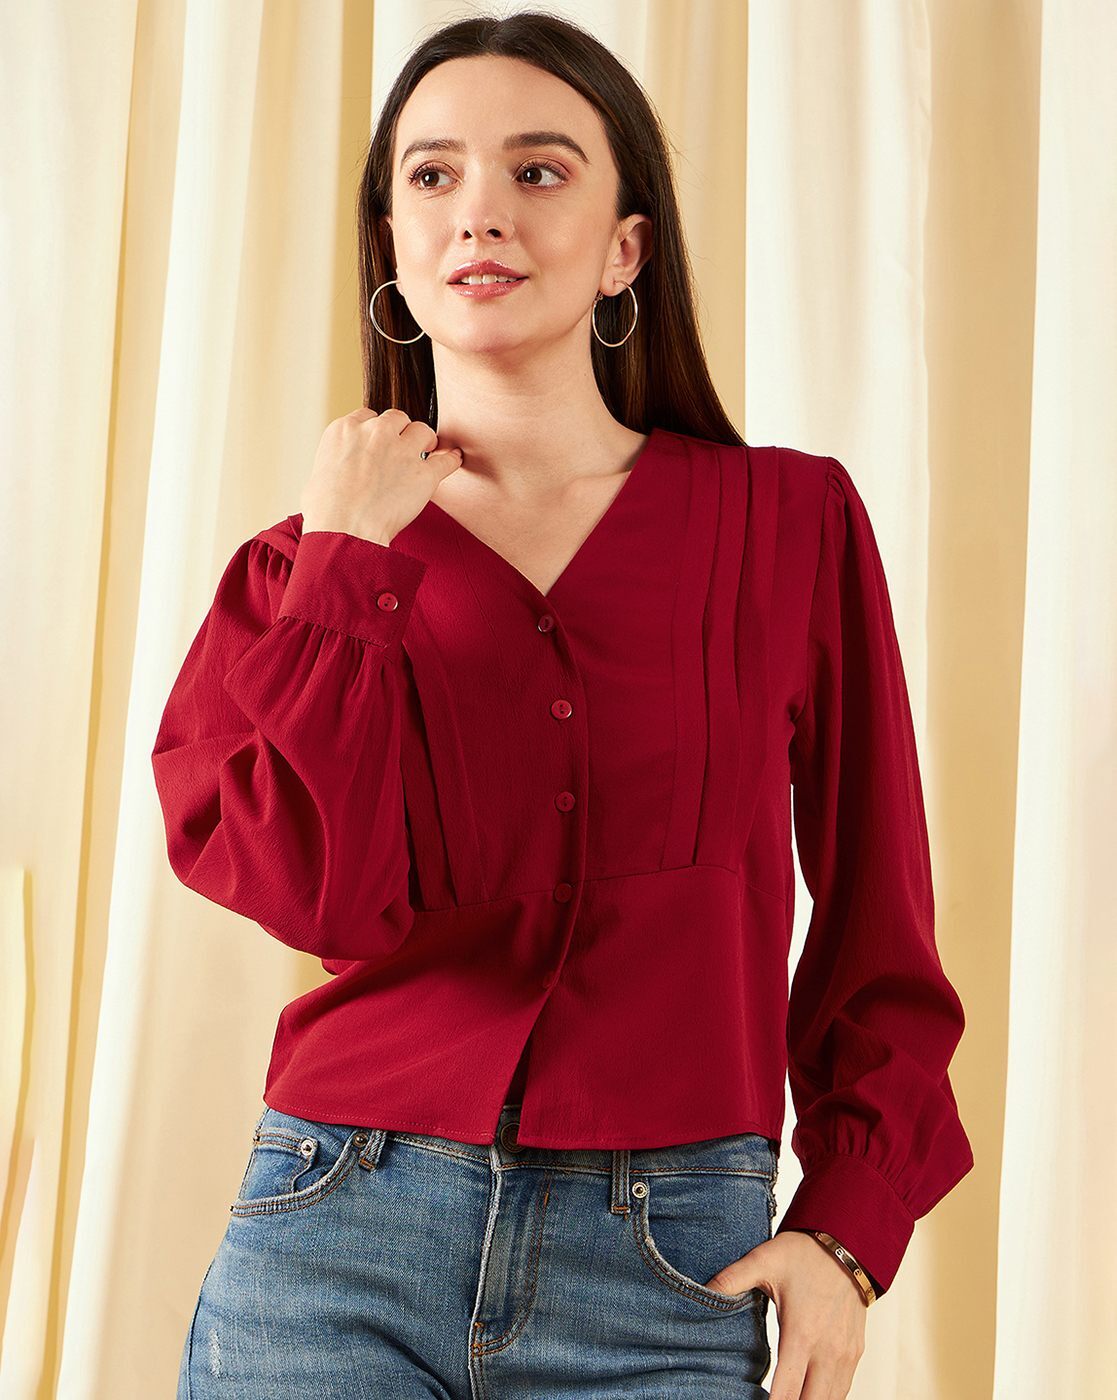 Discover 112+ maroon top with jeans best